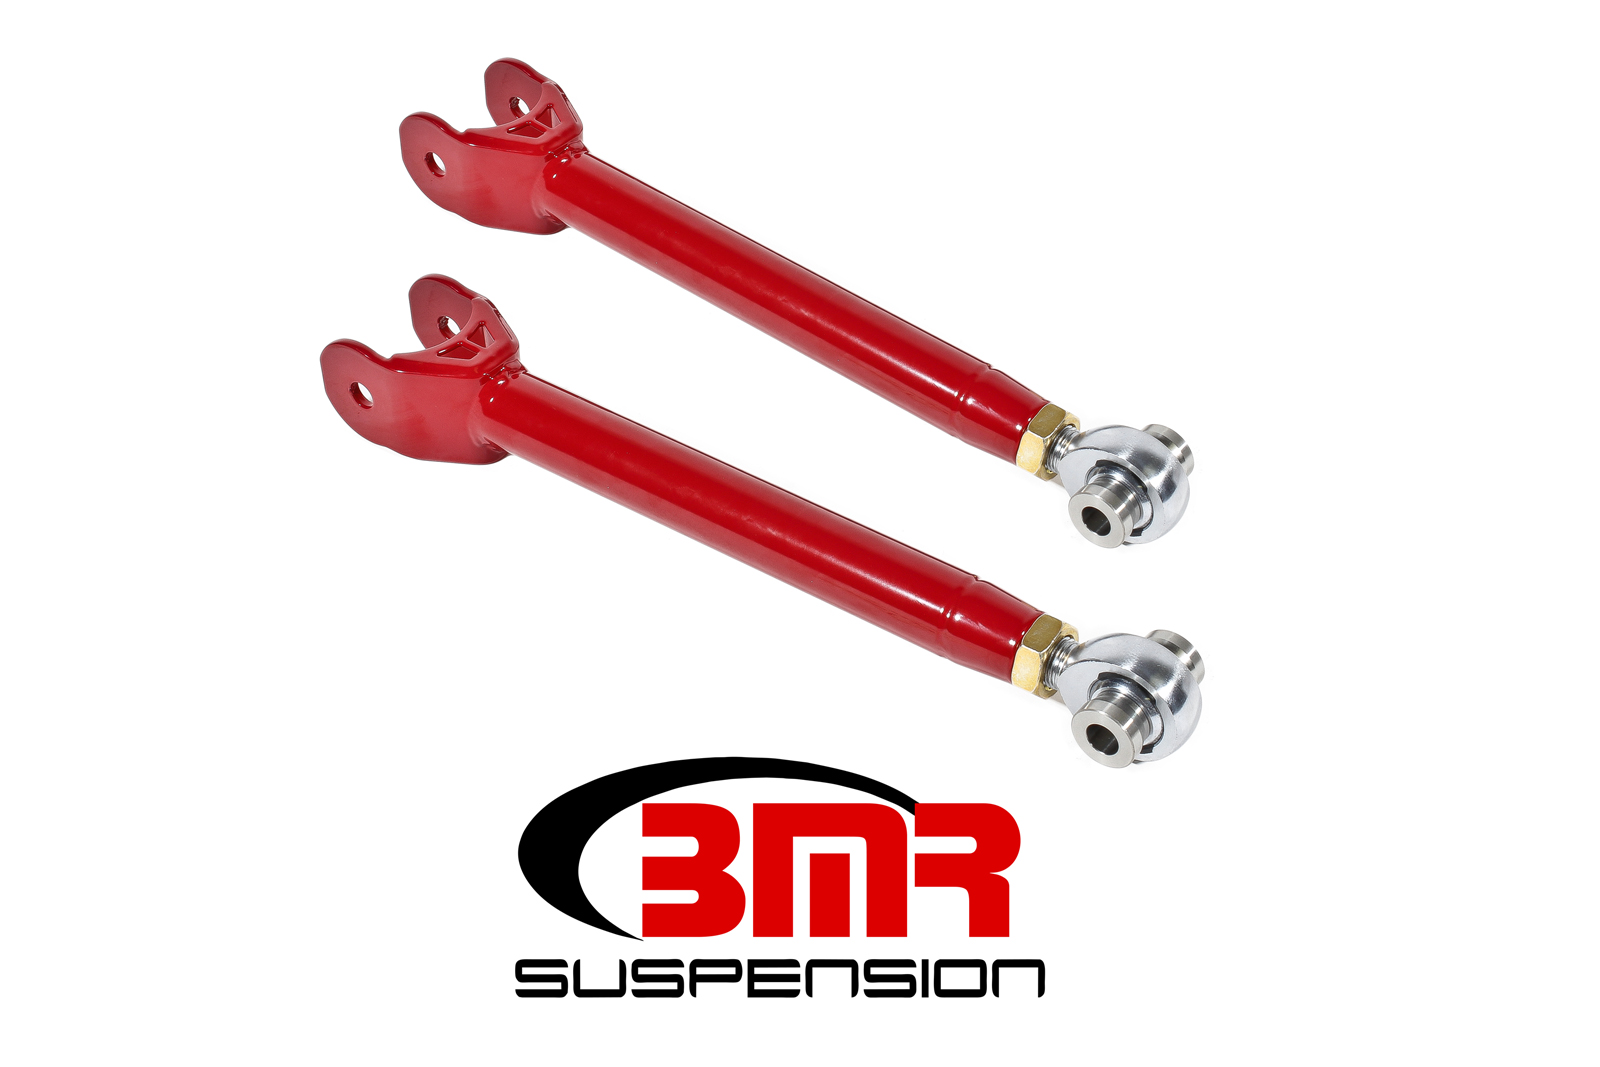 Lower Trailing Arms, Single Adjustable, Rod Ends, Fits all 2016-newer Chevrolet Camaros , BMR Suspension - TCA060R